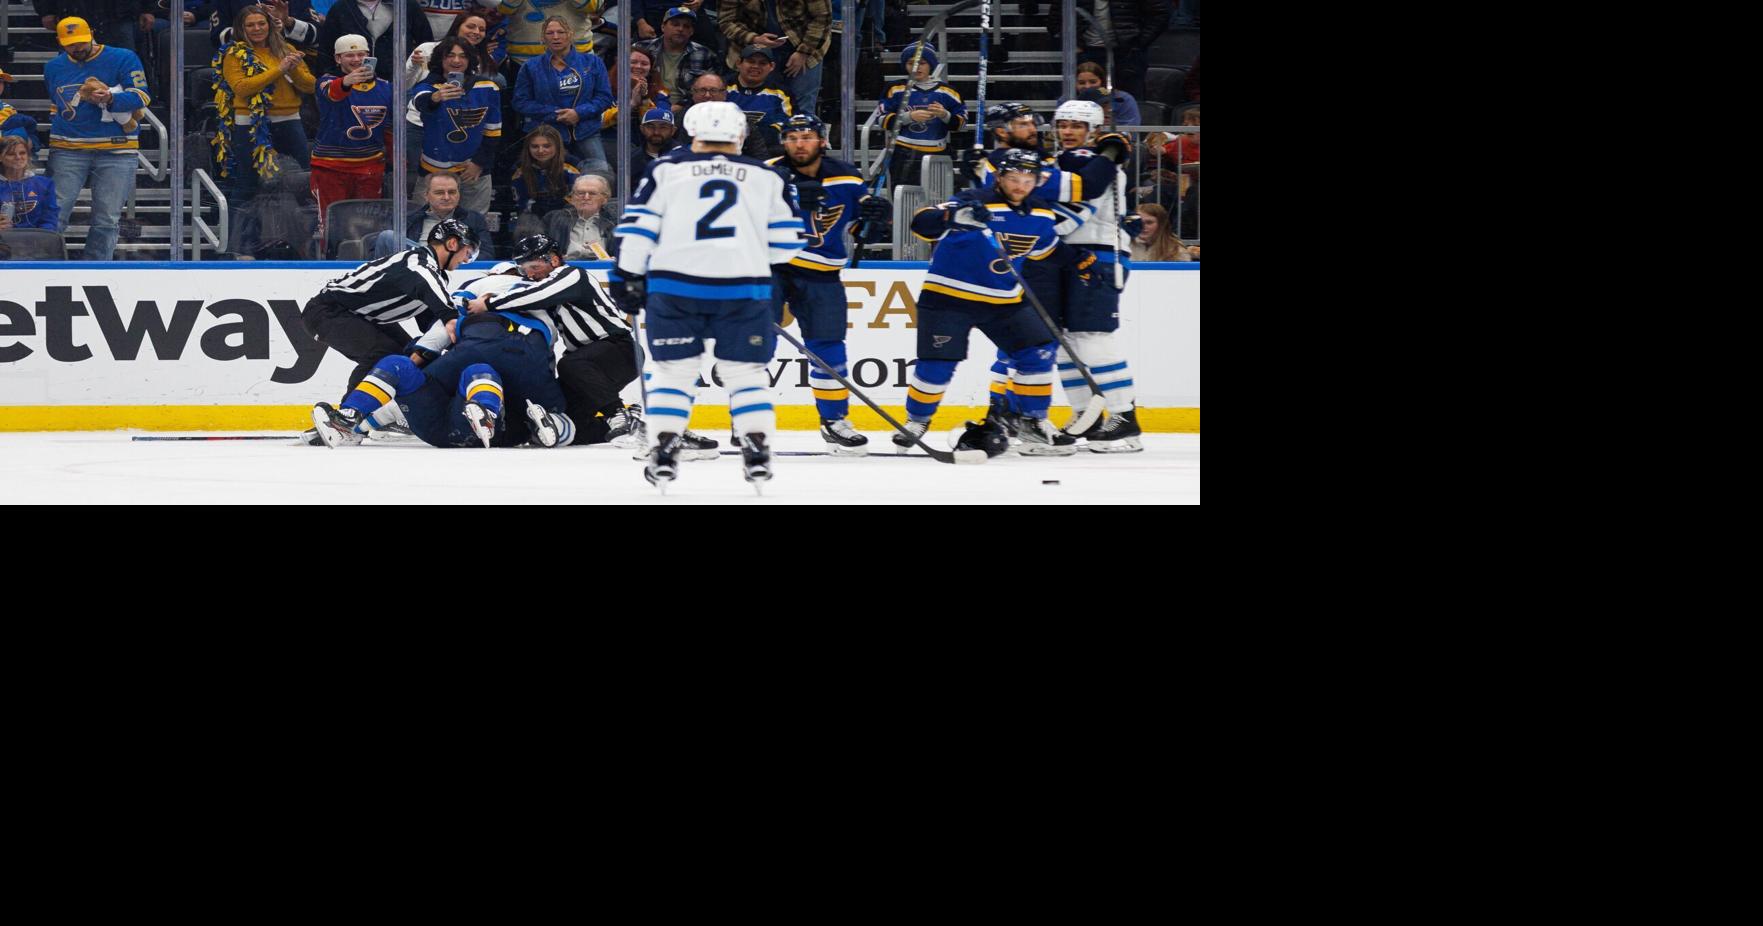 Stanley Cup: 5 wild stats from the St. Louis Blues' incredible run